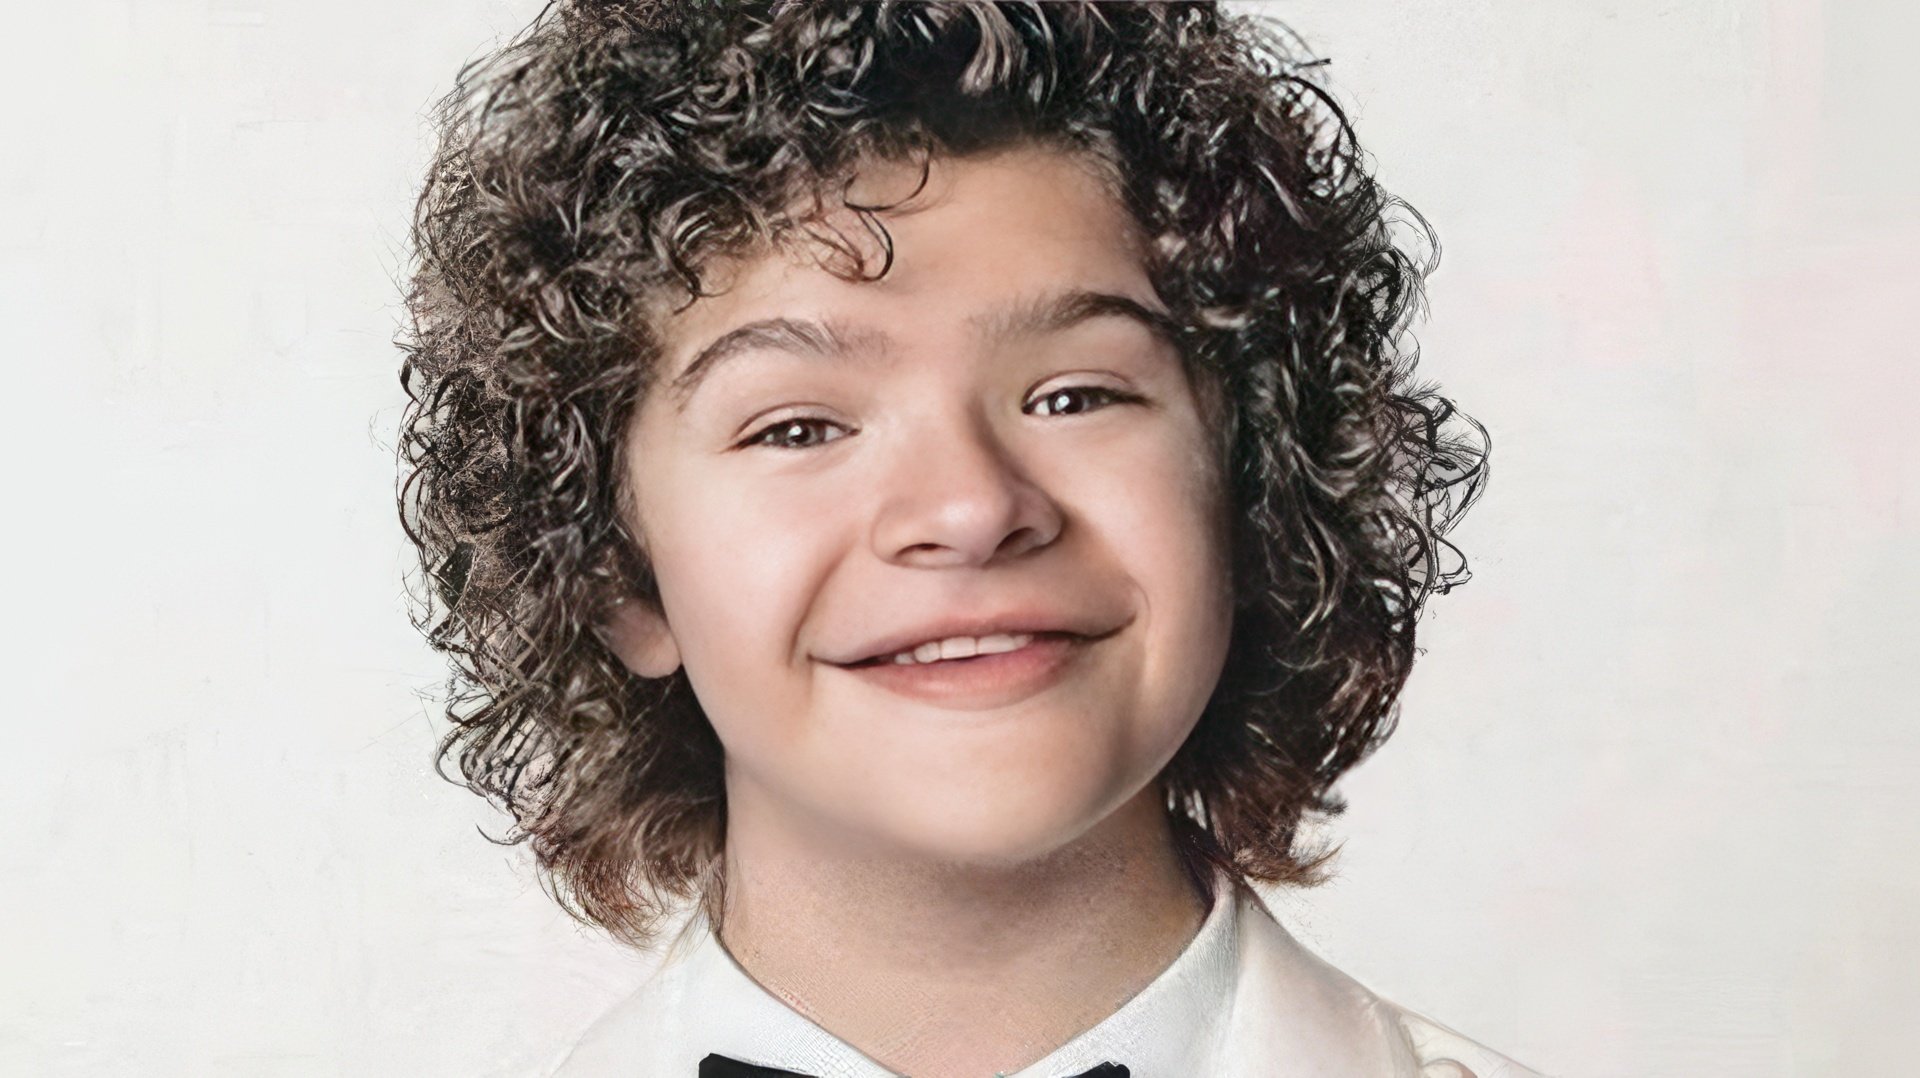 Gaten is very easy-going and talented